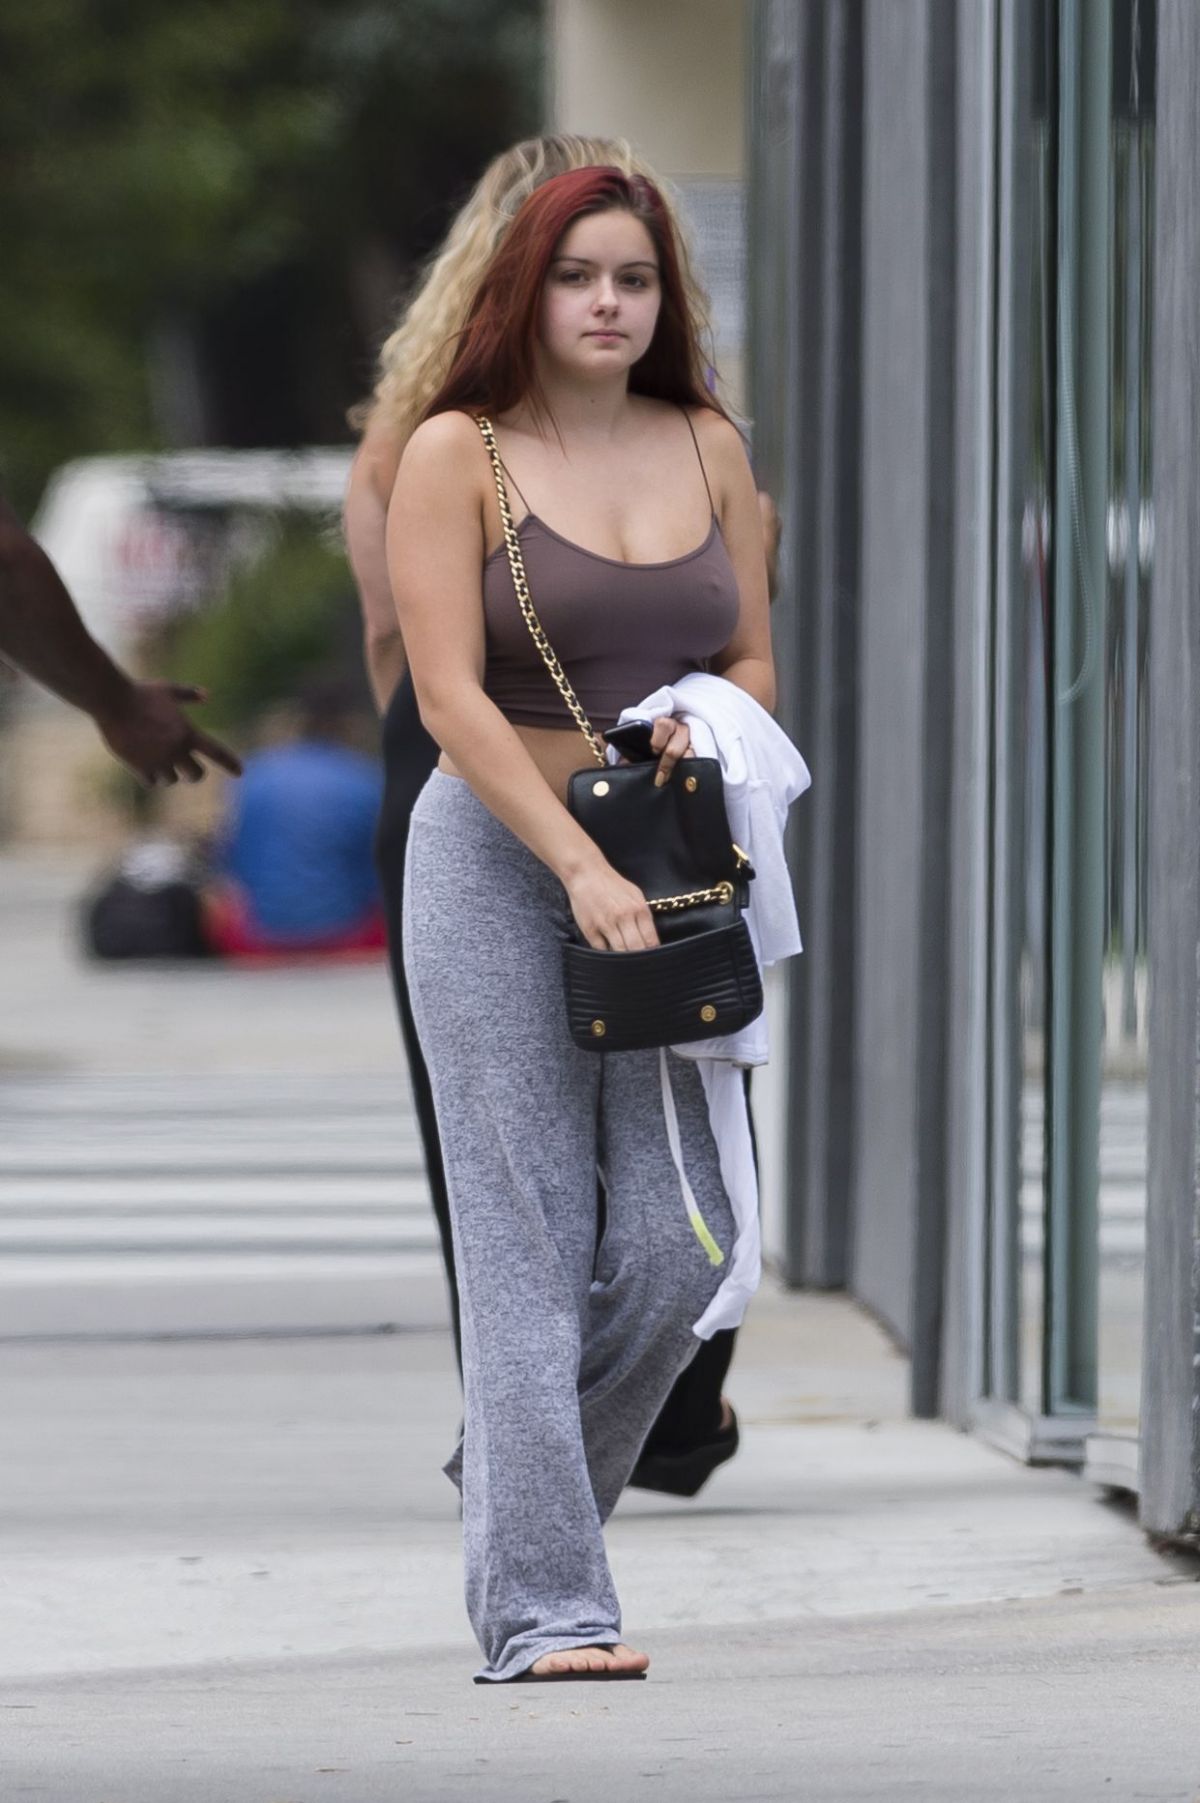 ariel-winter-in-tank-top-out-and-about-in-west-hollywood-05-18-2016_6.jpg